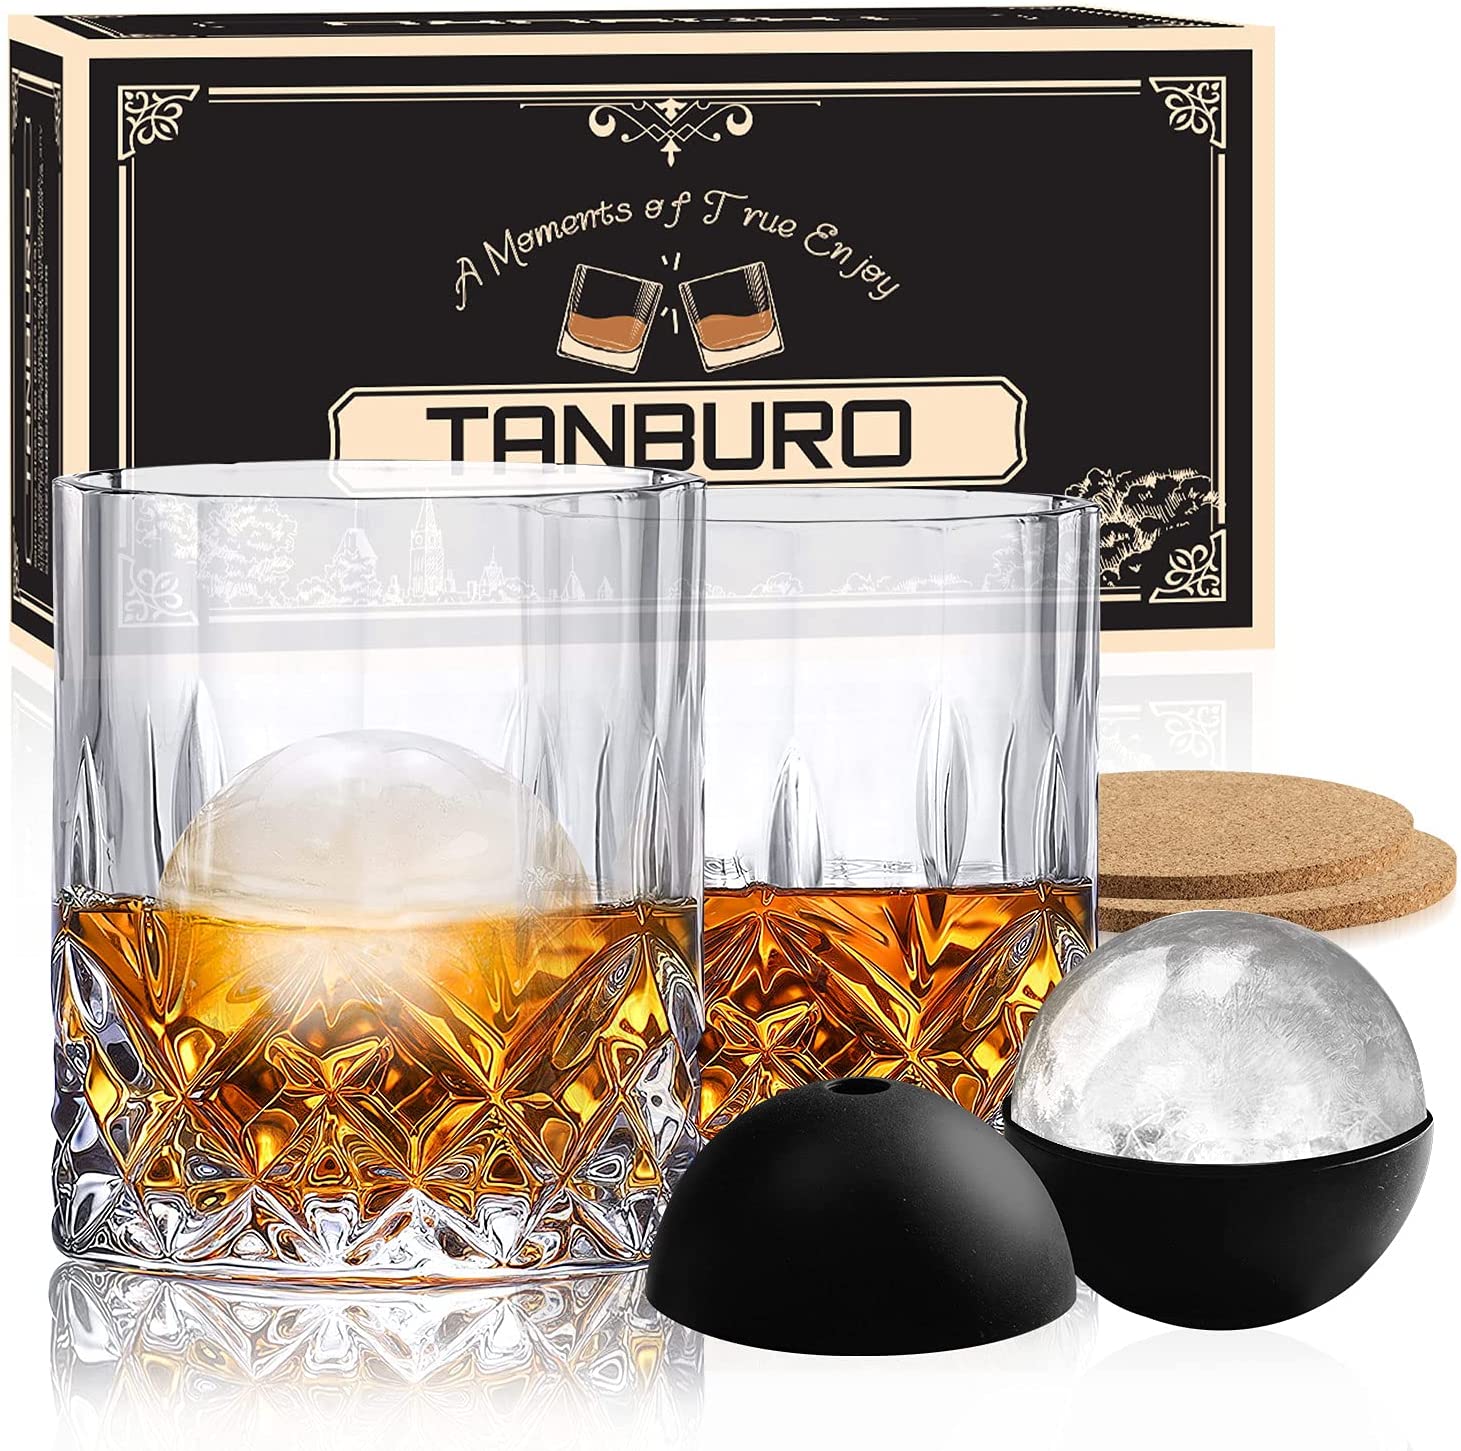 Well-designed Christian Gifts - Classic Old Fashioned whiskey Glasses Crystal Scotch Bourbon Glasses Gift with Ice Ball Mold and Coasters – Shunstone